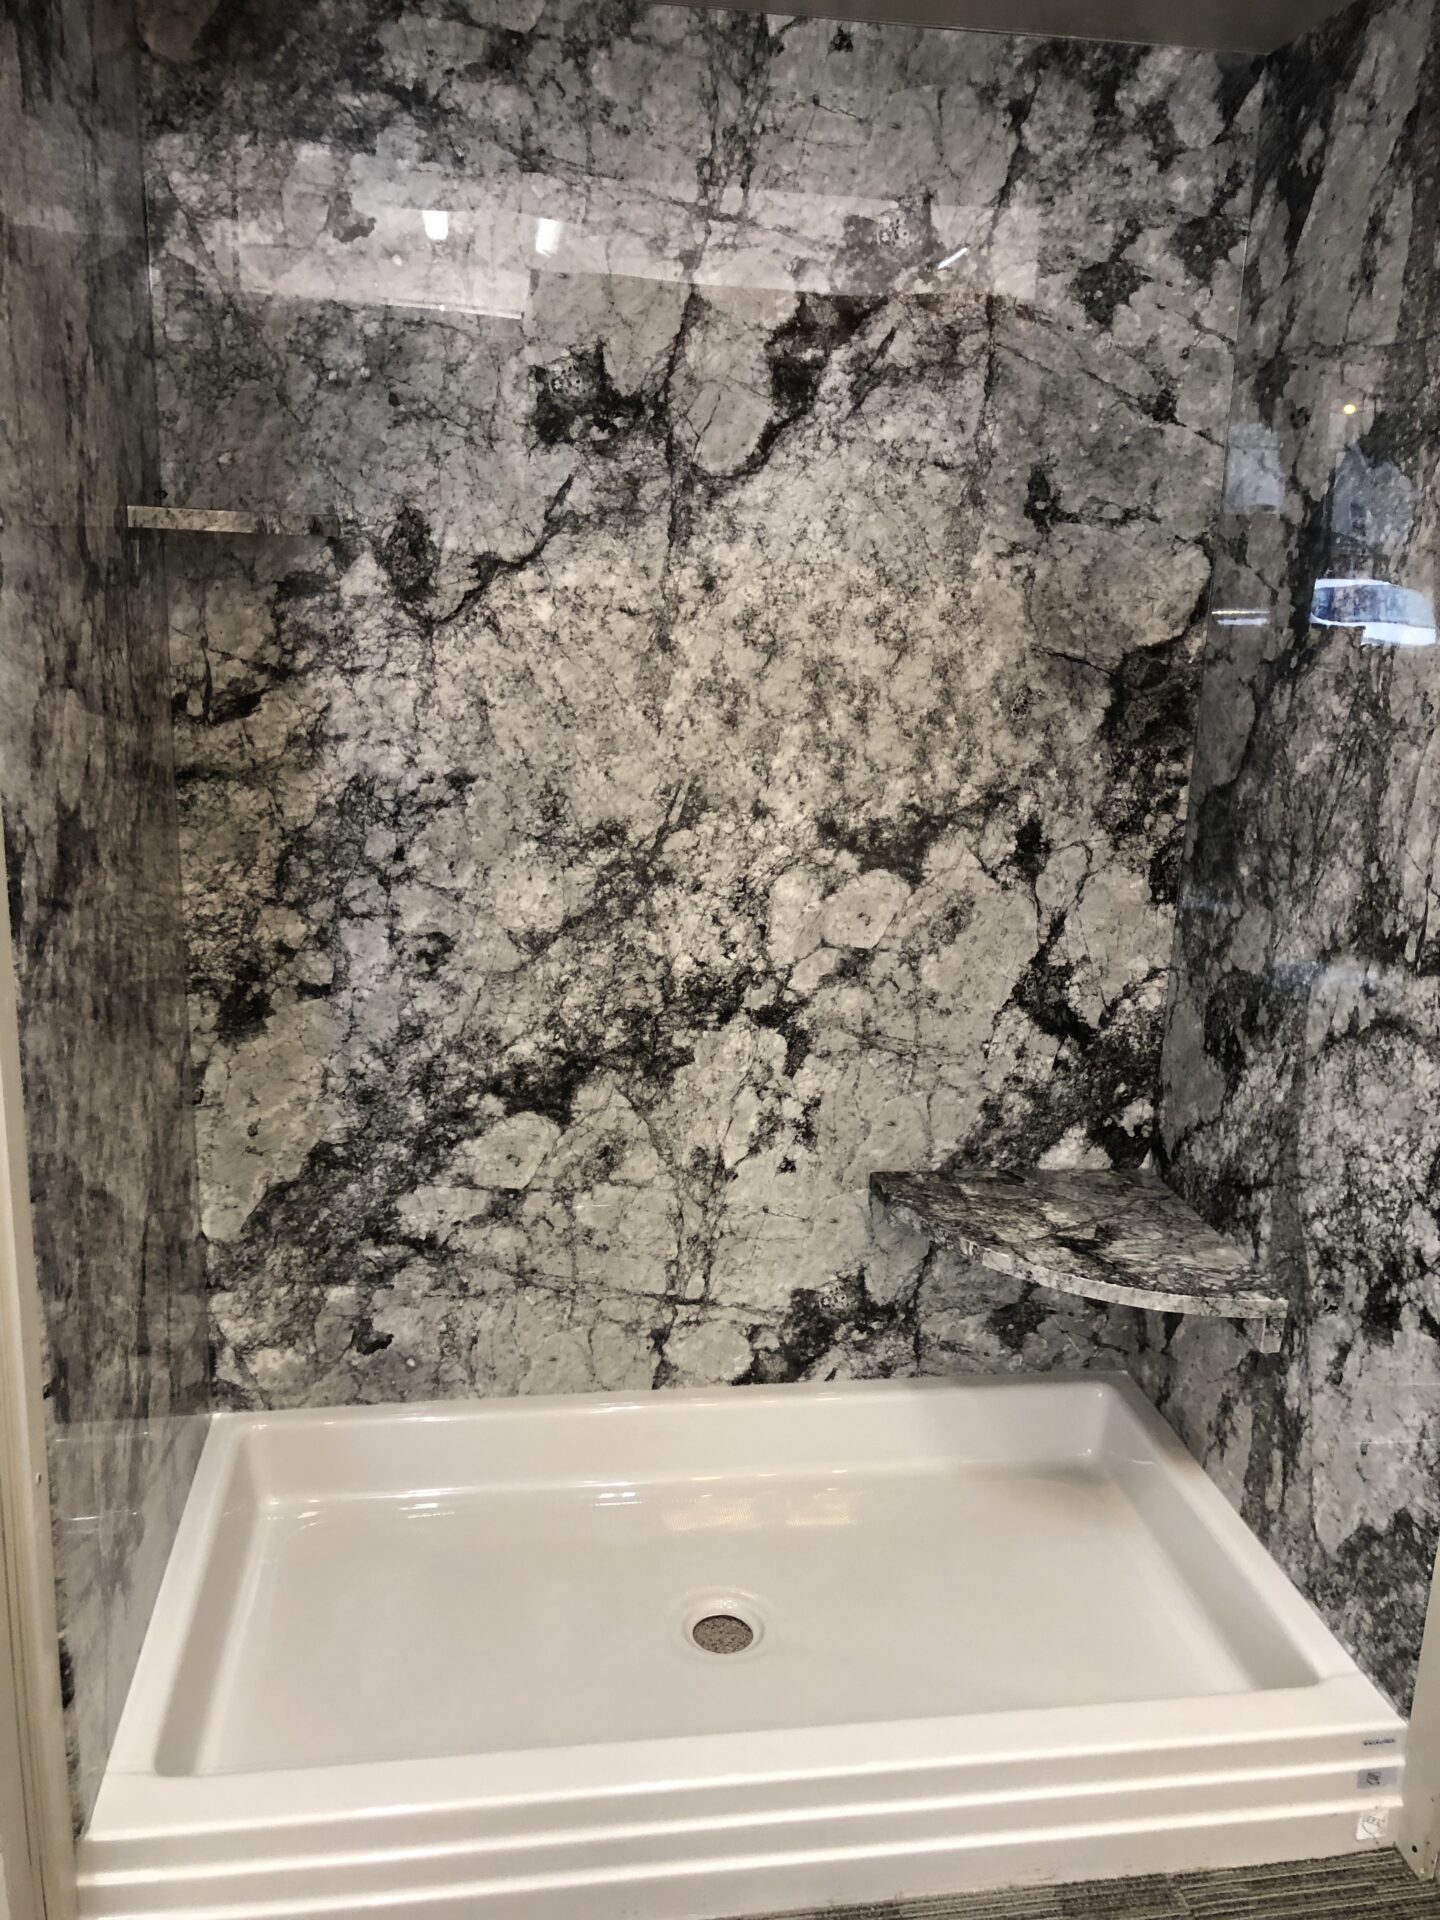 Tyvarian Lunar Shower with solid surface shower base. You can customize your bath with tile alternatives that are grout free = no leak, no scrubbing. Contact AMI in Canton, Ohio.